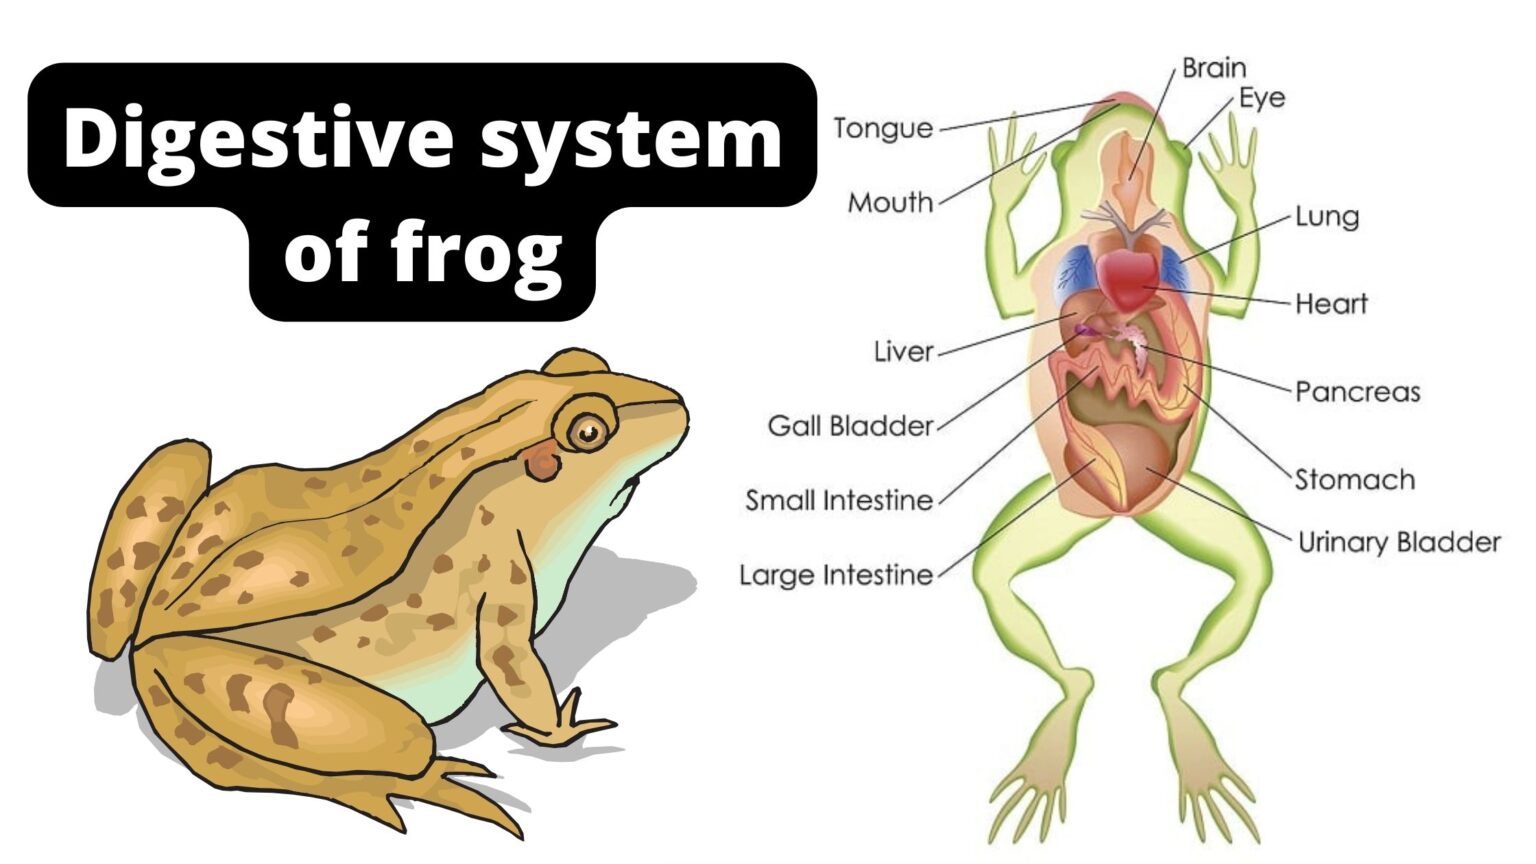 Digestive System of Frog With Diagram